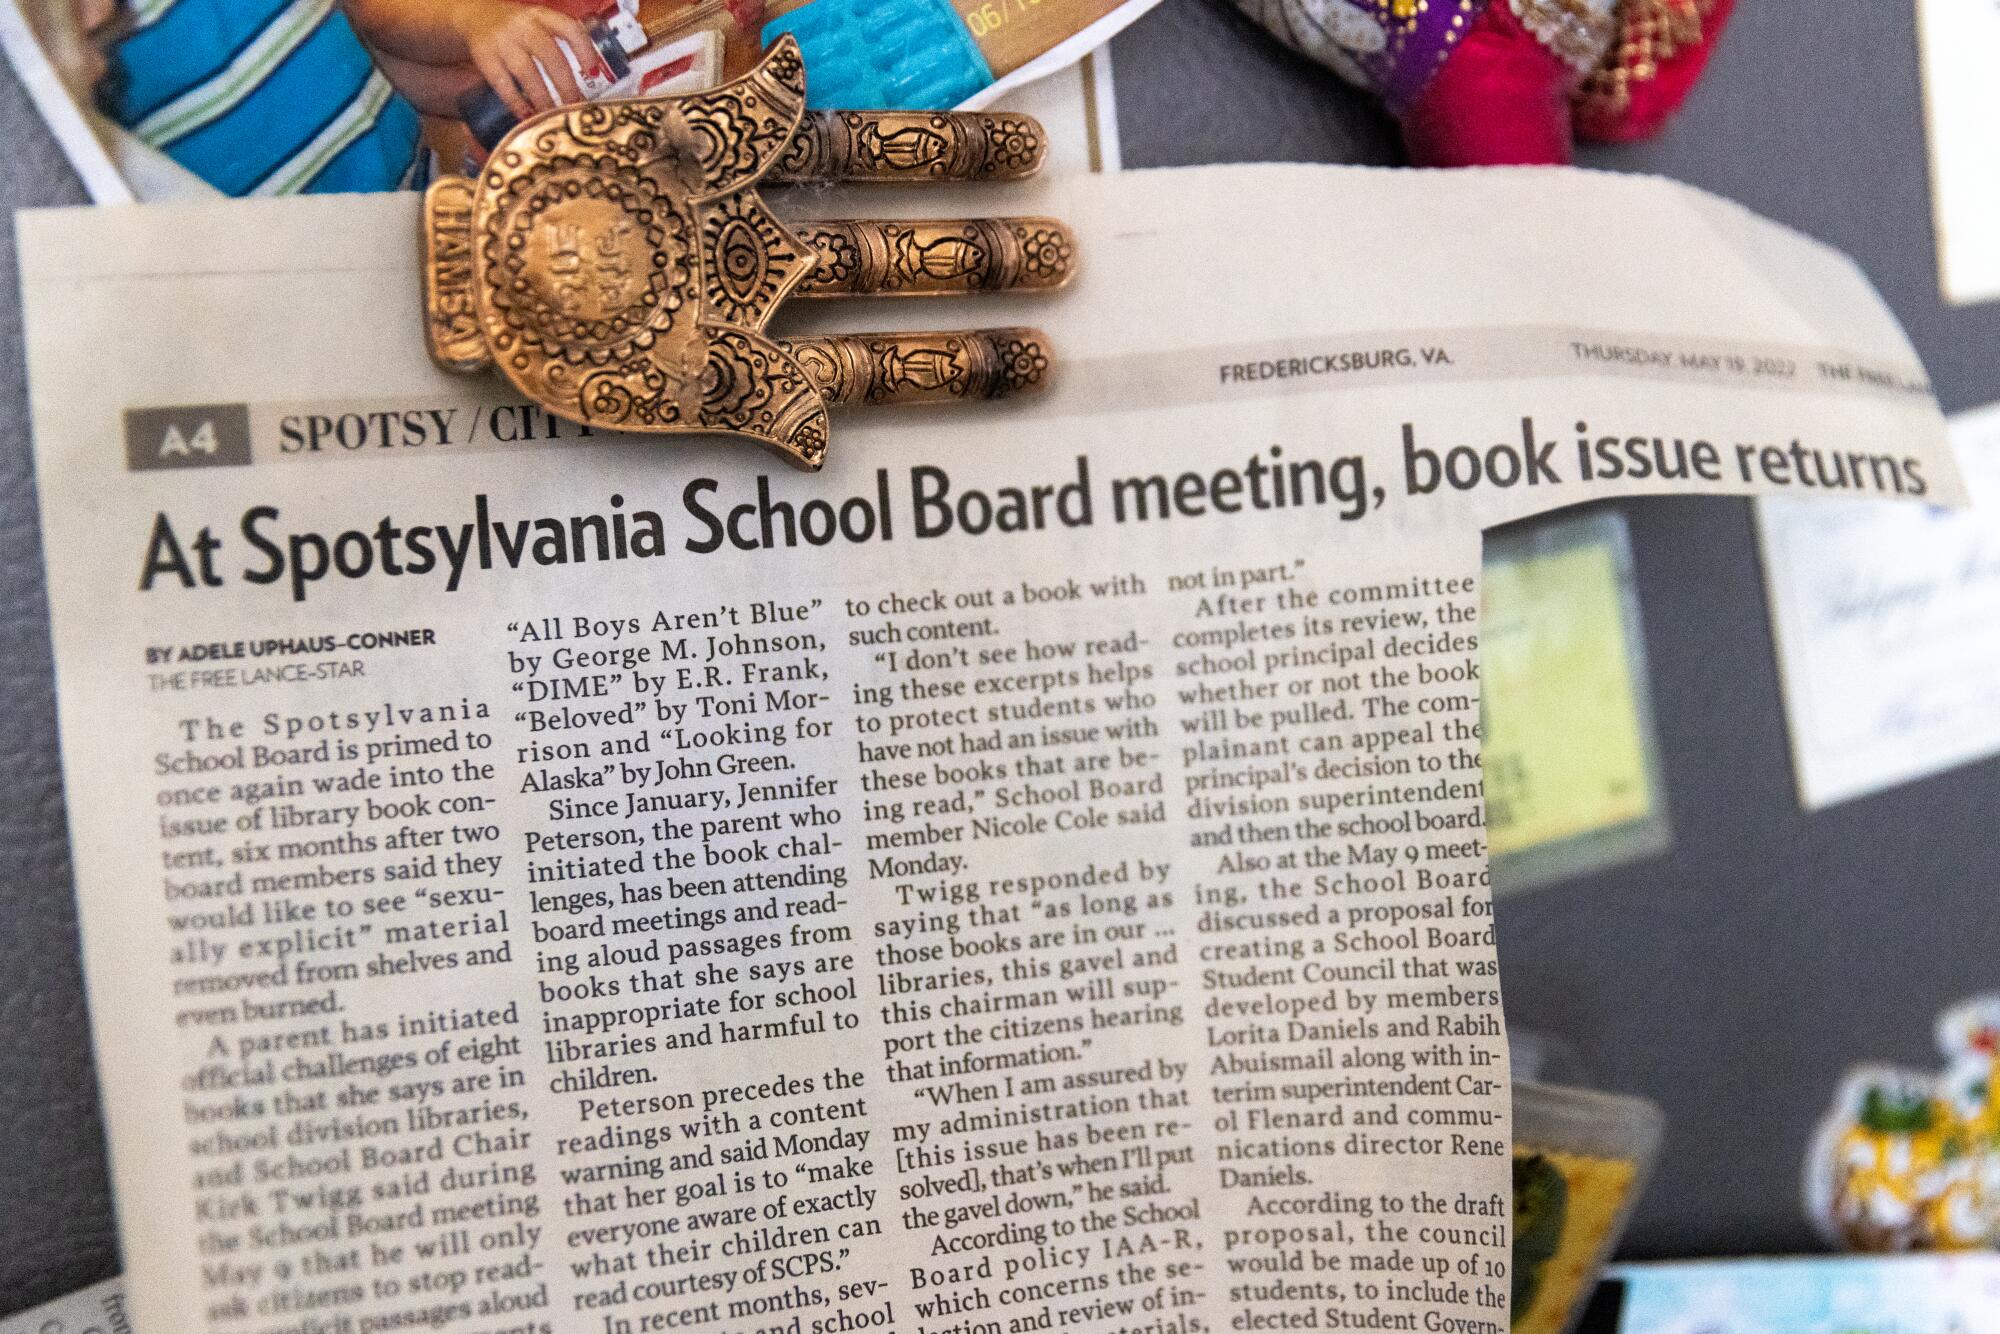 A Hamsa Hand magnet holds a May 2022 Free LanceStar newspaper clipping about book 